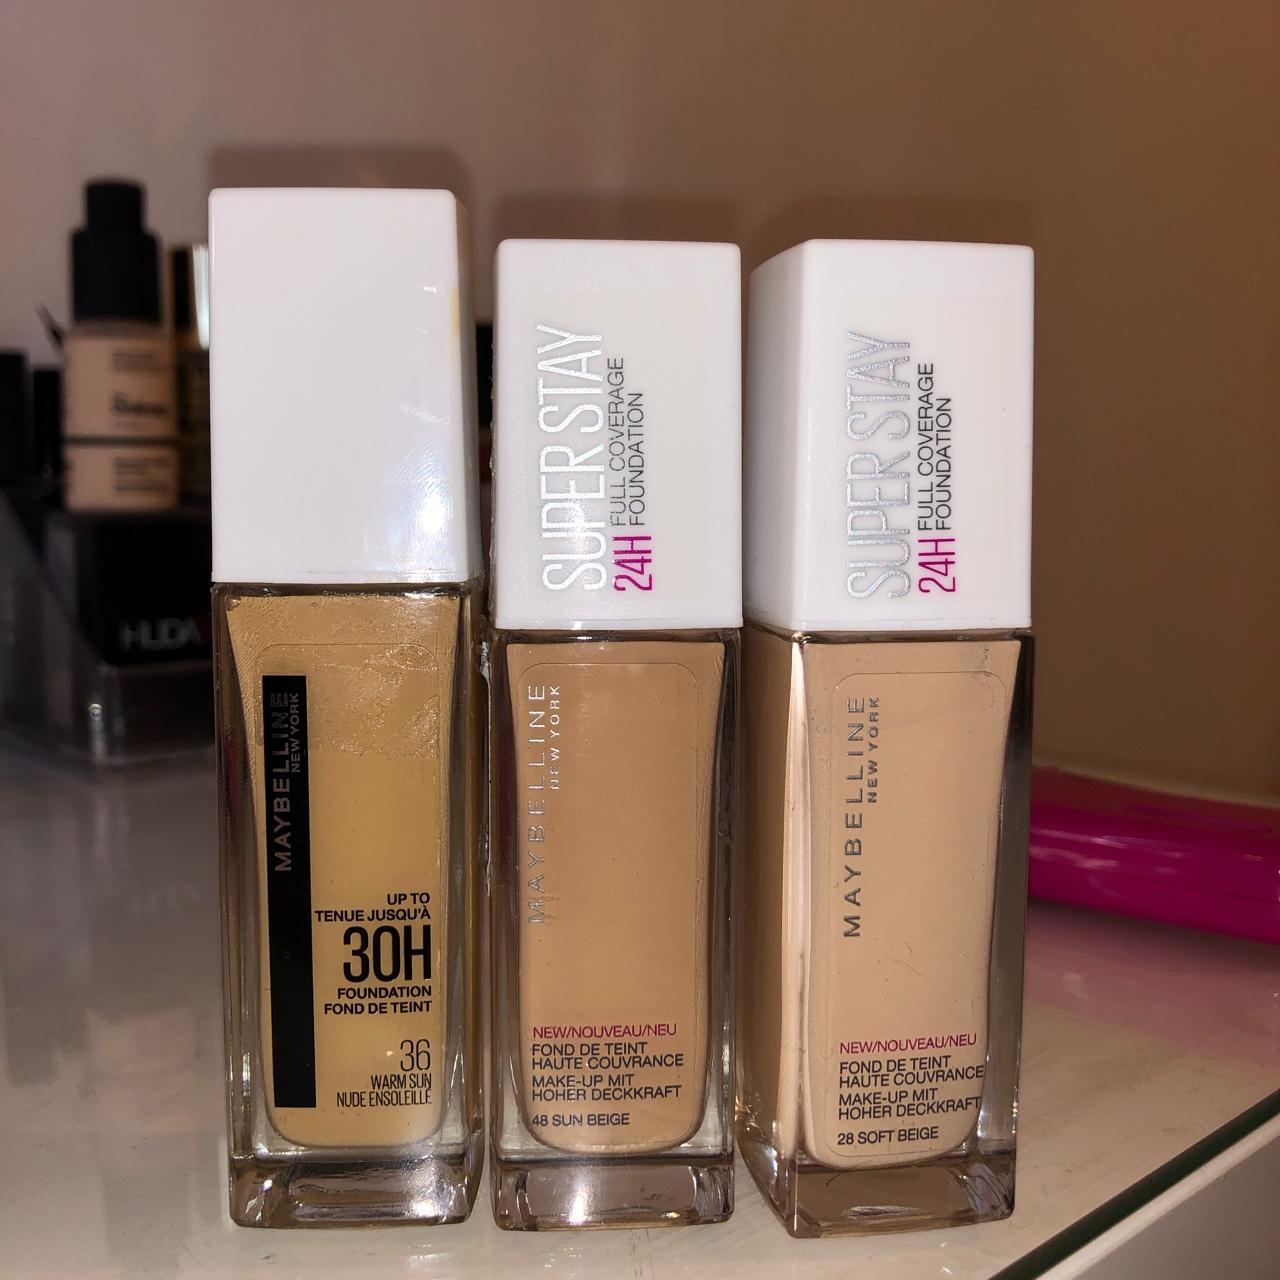 X2 - 24hour Maybelline Depop full superstay coverage...